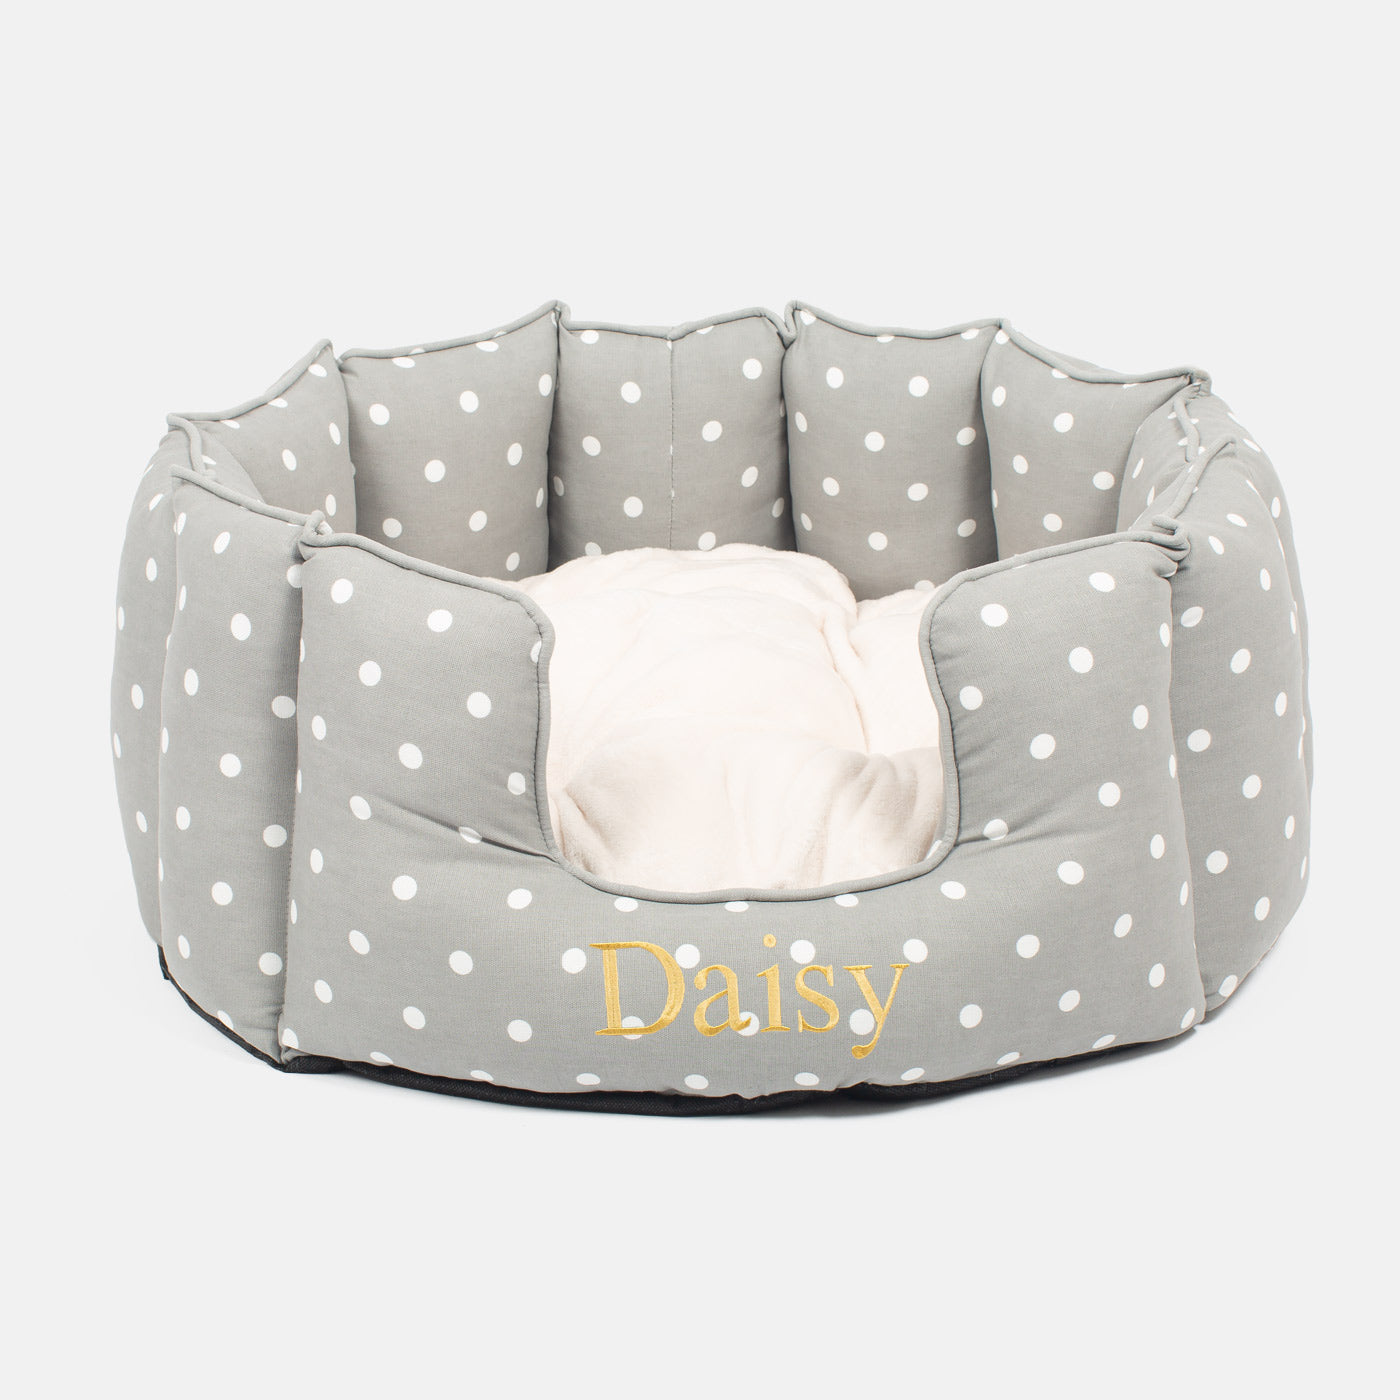 Discover Our Luxurious High Wall Bed For Cats & Kittens, Featuring Reversible Inner Cushion With Teddy Fleece To Craft The Perfect Cat Bed In Stunning Grey Spot! Available To Personalize Now at Lords & Labradors US